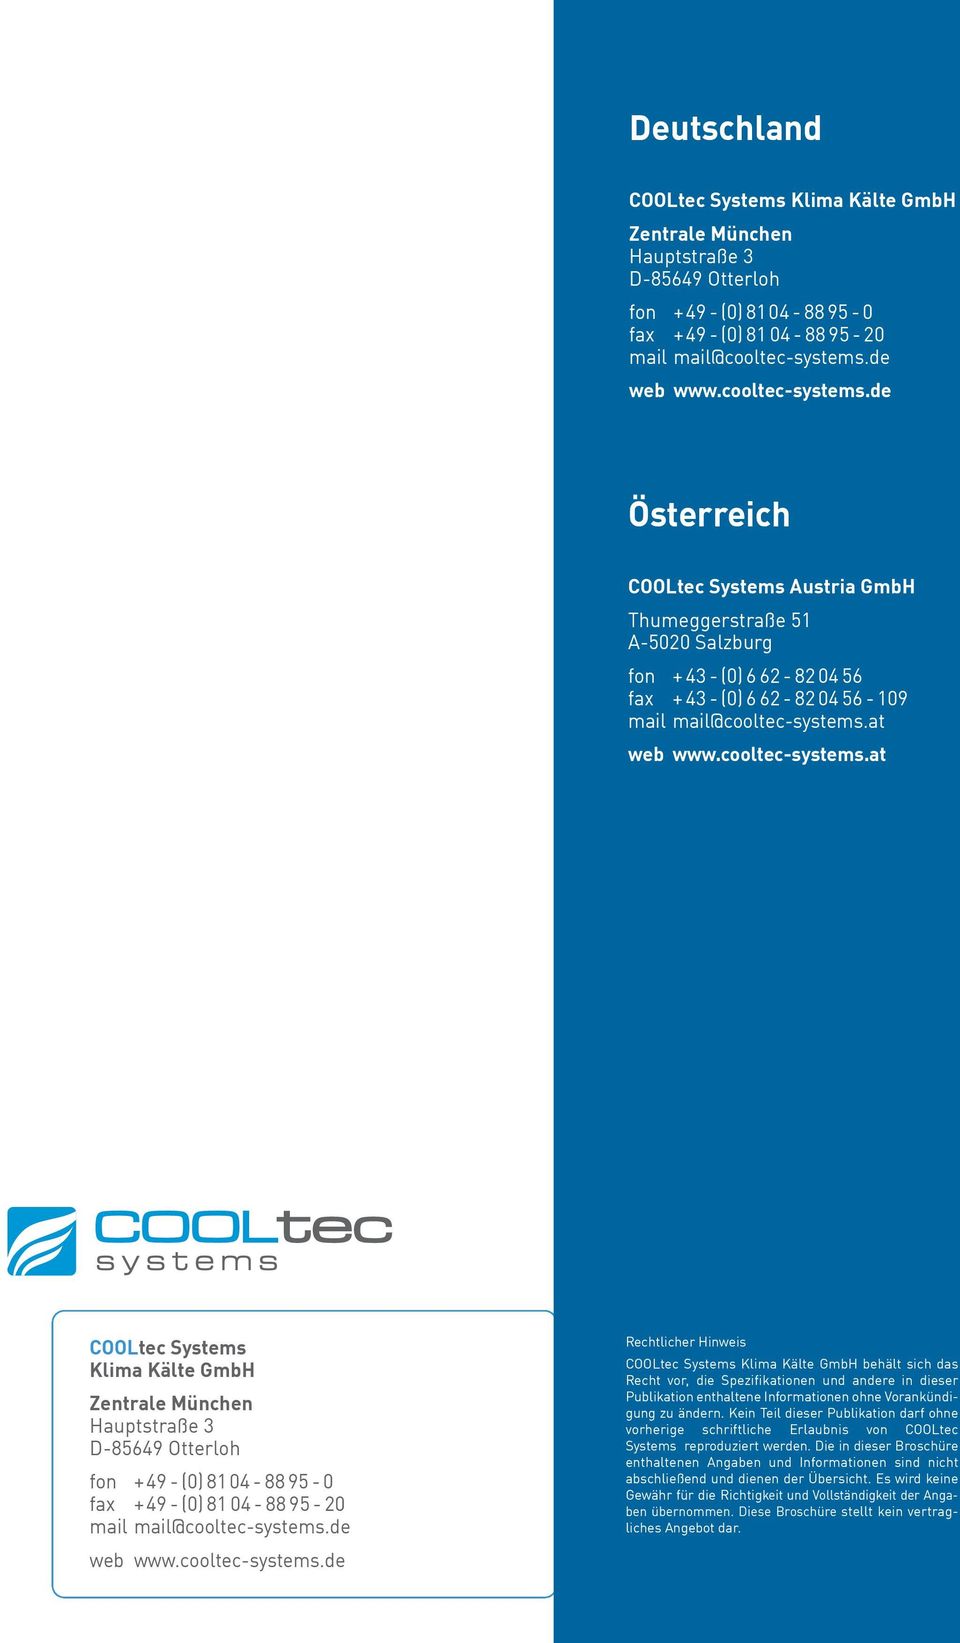 at web www.cooltec-systems.at COOLtec Systems Klima Kälte GmbH Zentrale München Hauptstraße 3 D-85649 Otterloh fon +49 - (0)8104-88 95-0 fax +49 - (0)8104-88 95-20 mail mail@cooltec-systems.